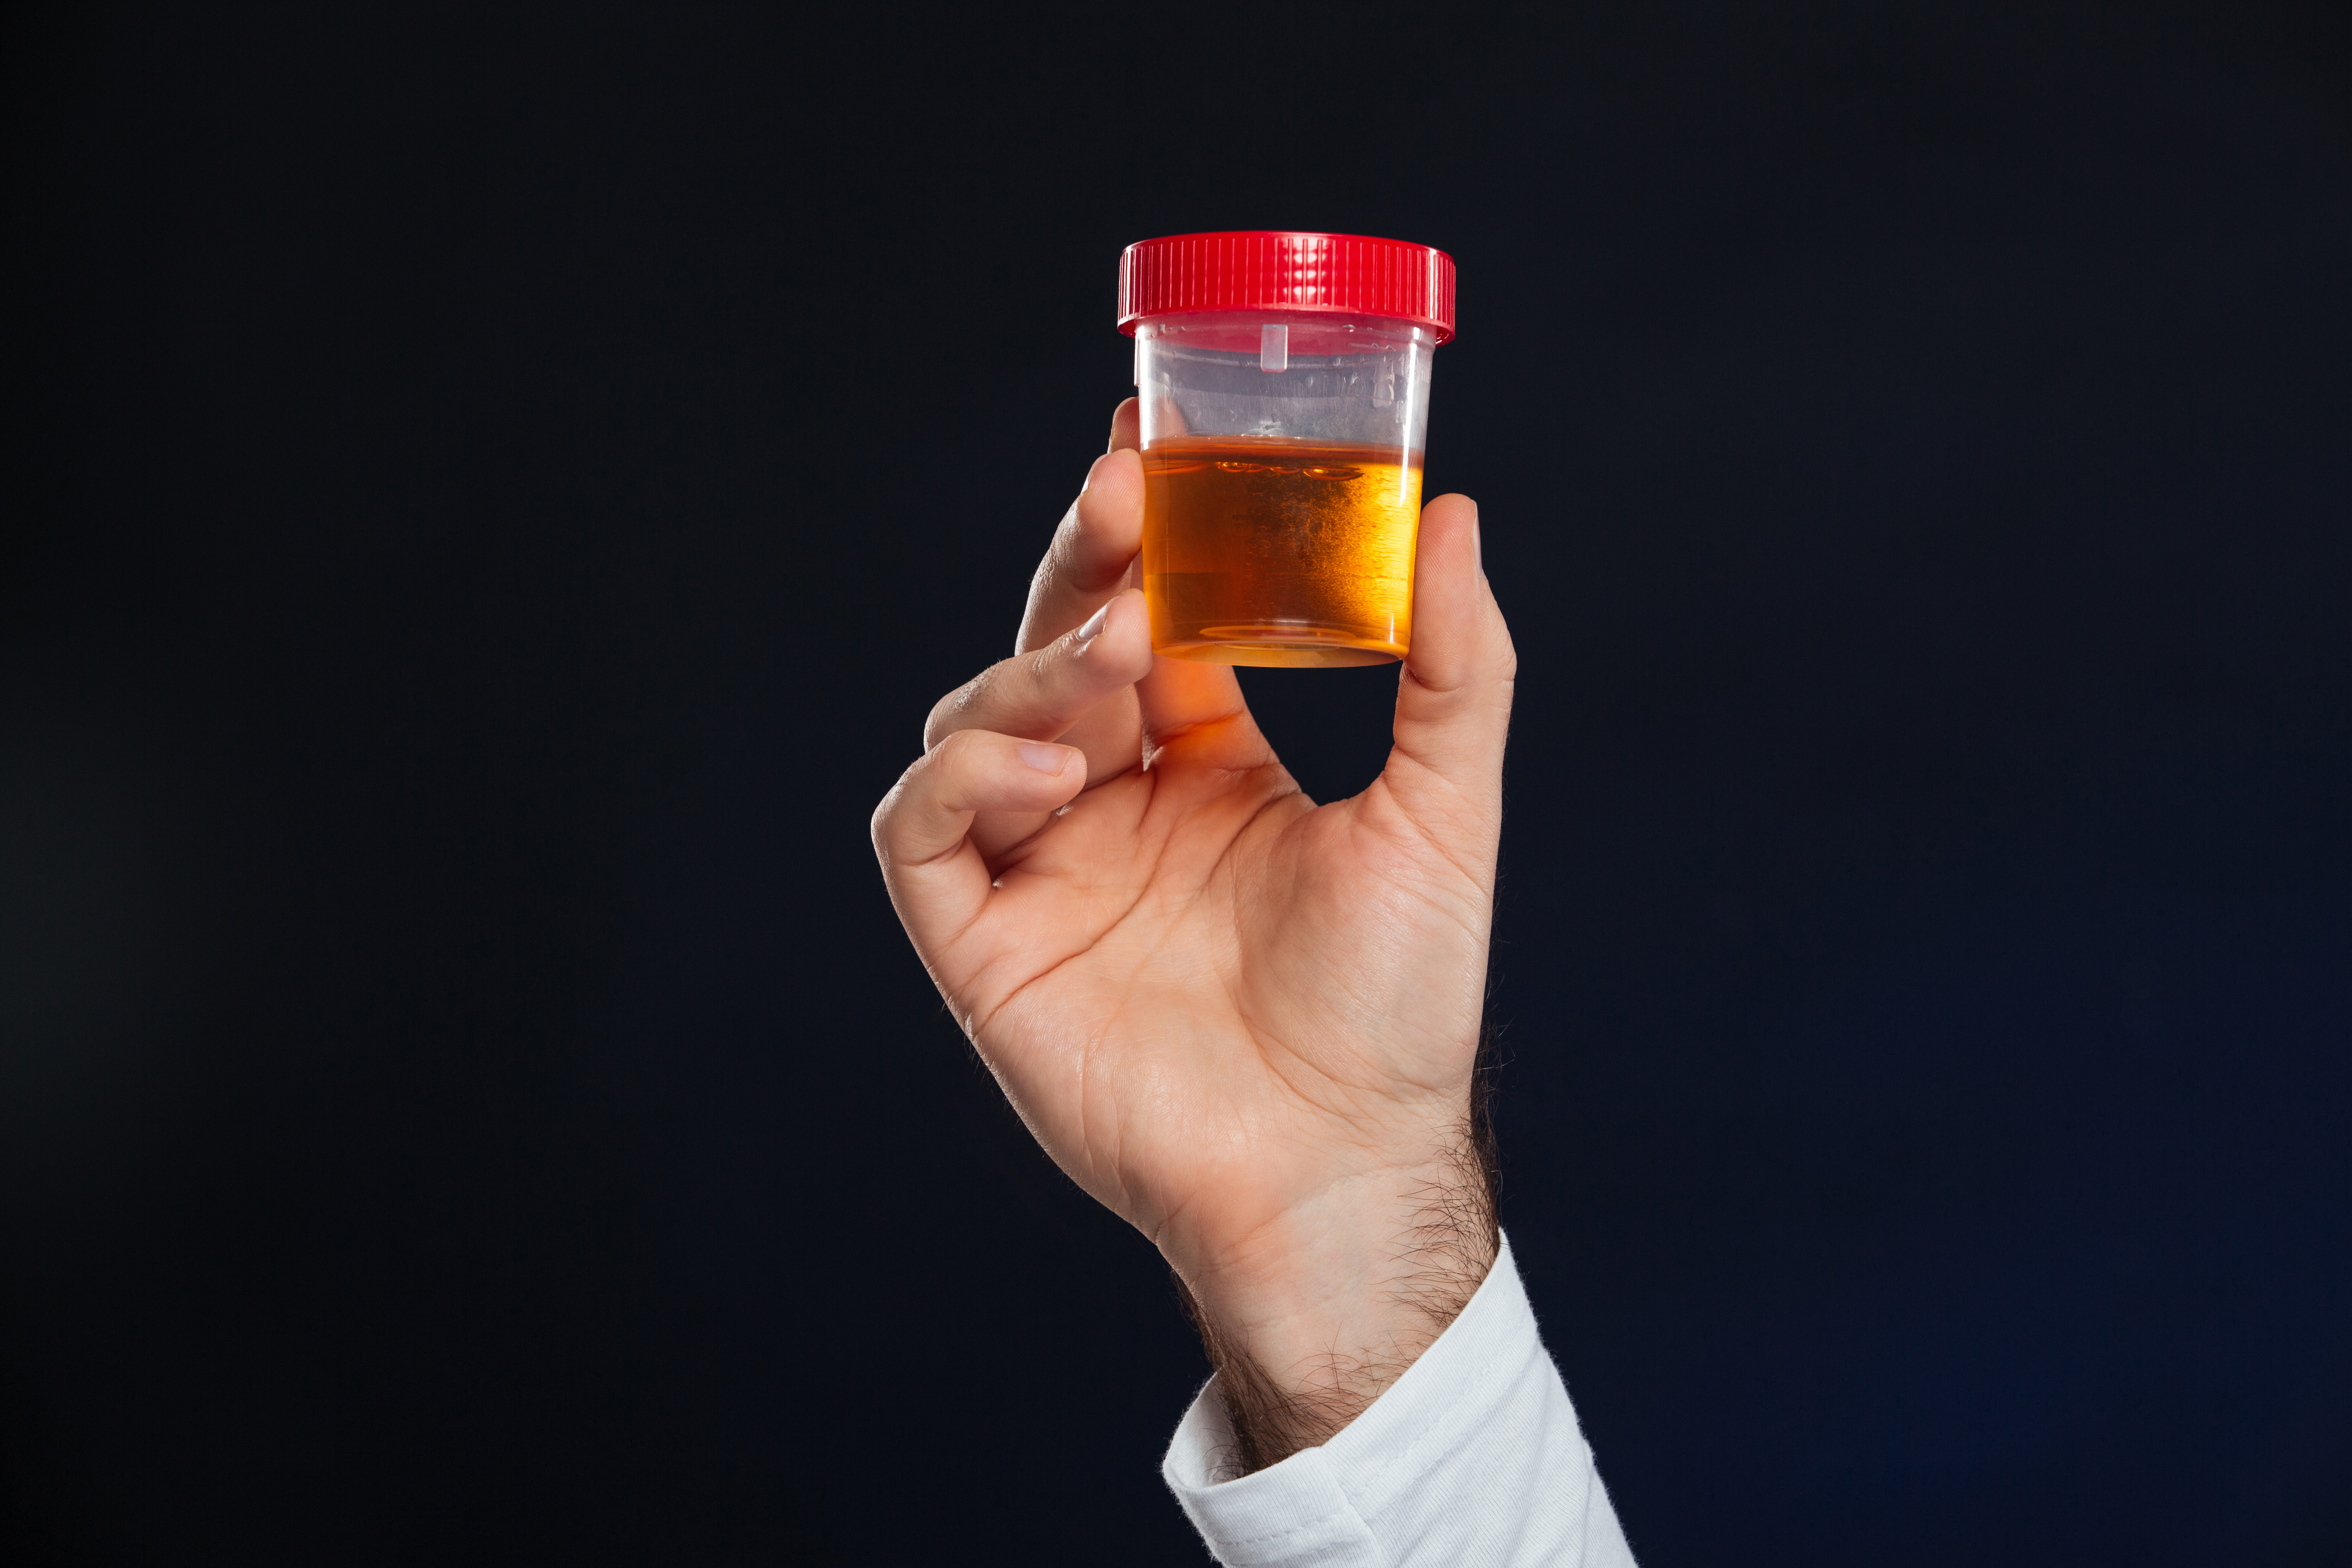 close-up-male-s-hand-holding-container-with-urine-sample.jpg